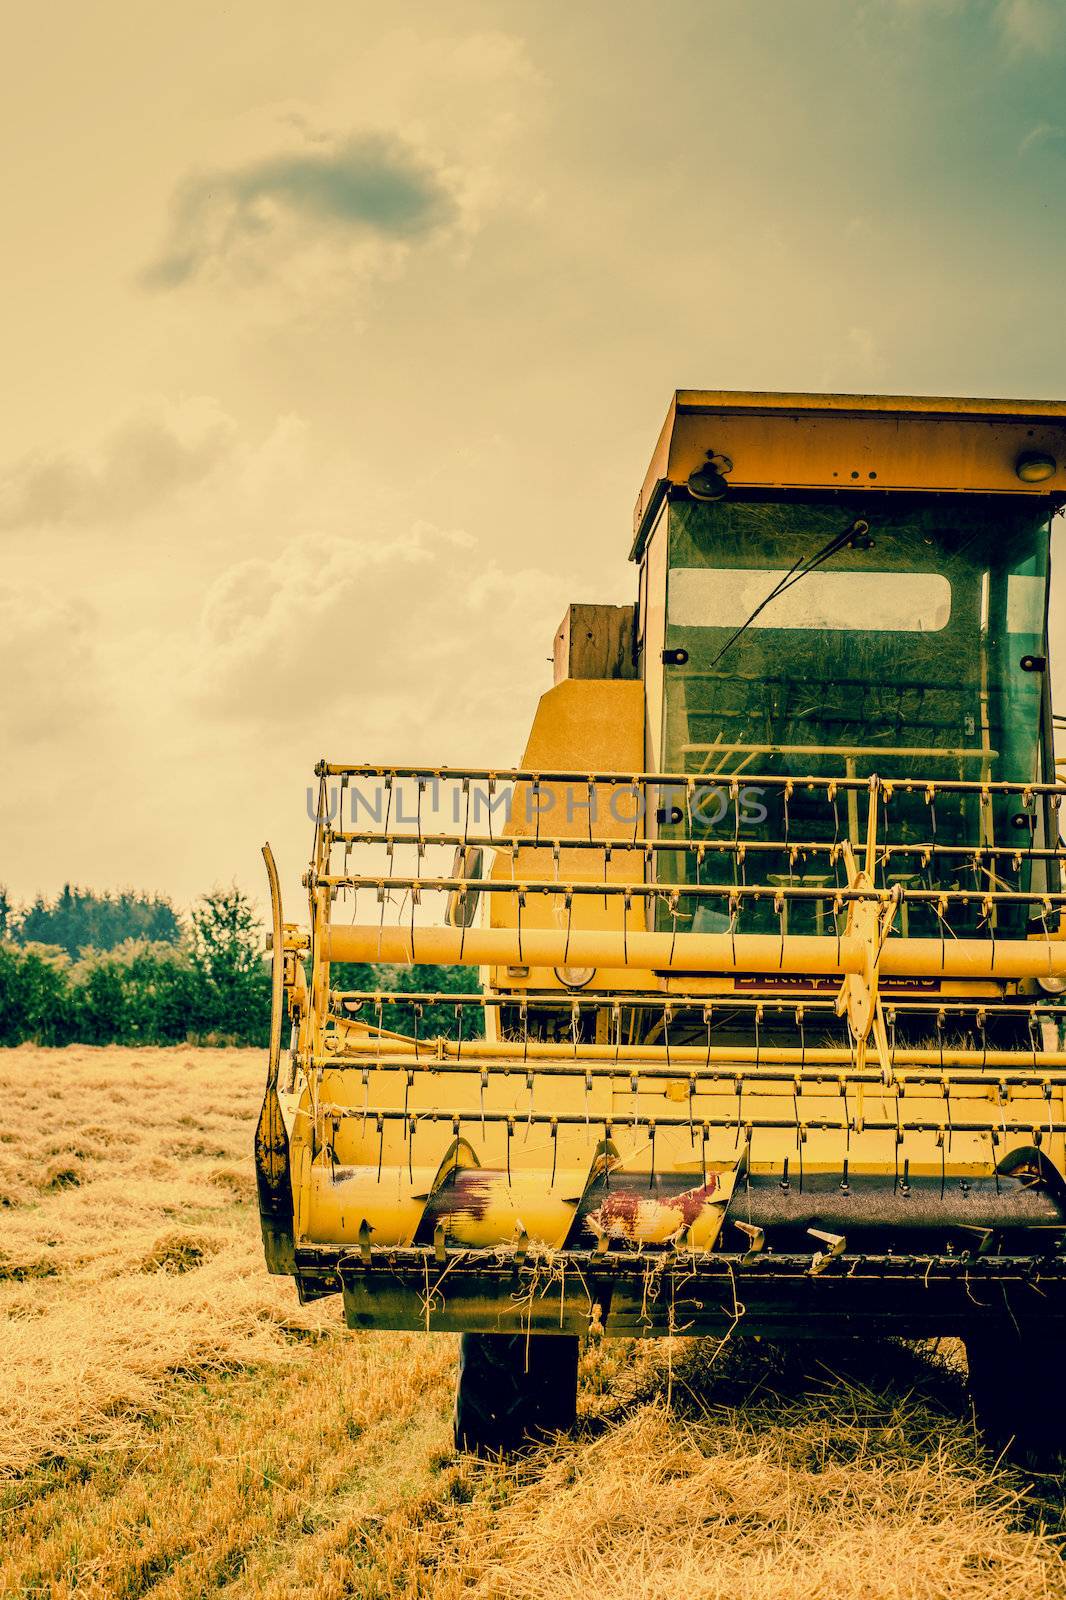 Close-up photo of a yellow harvester machine